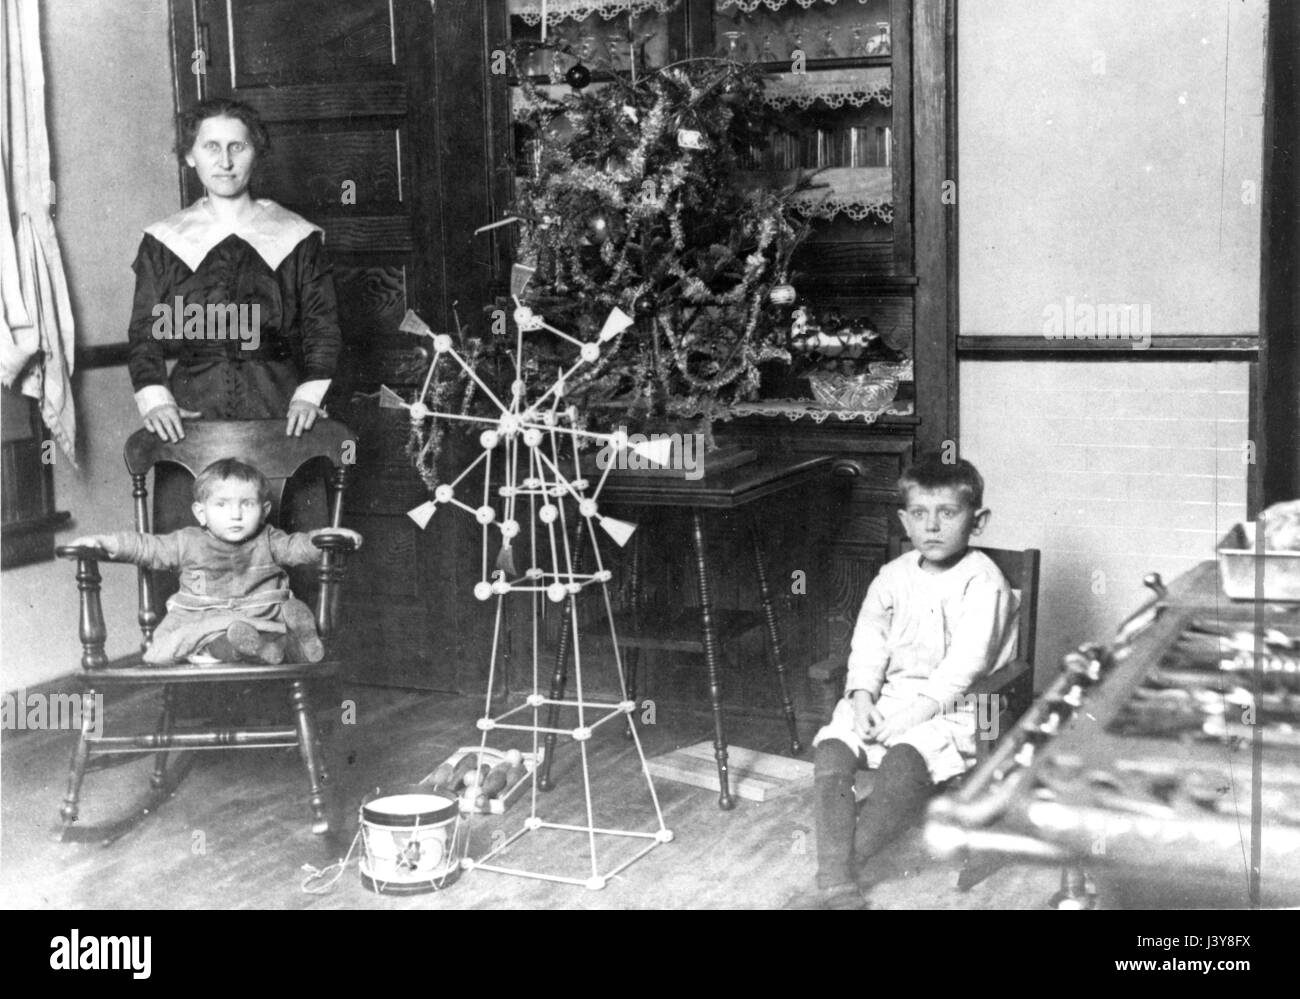 A woman and [probably] her sons, with a small table Christmas tree, c.1916.  They pose in the kitchen of an above-average home. I think the woman is a servant in the house, and this is her family's Christmas celebration.  To see my other Christmas-related vintage images, Search:  Prestor  vintage  holiday Stock Photo